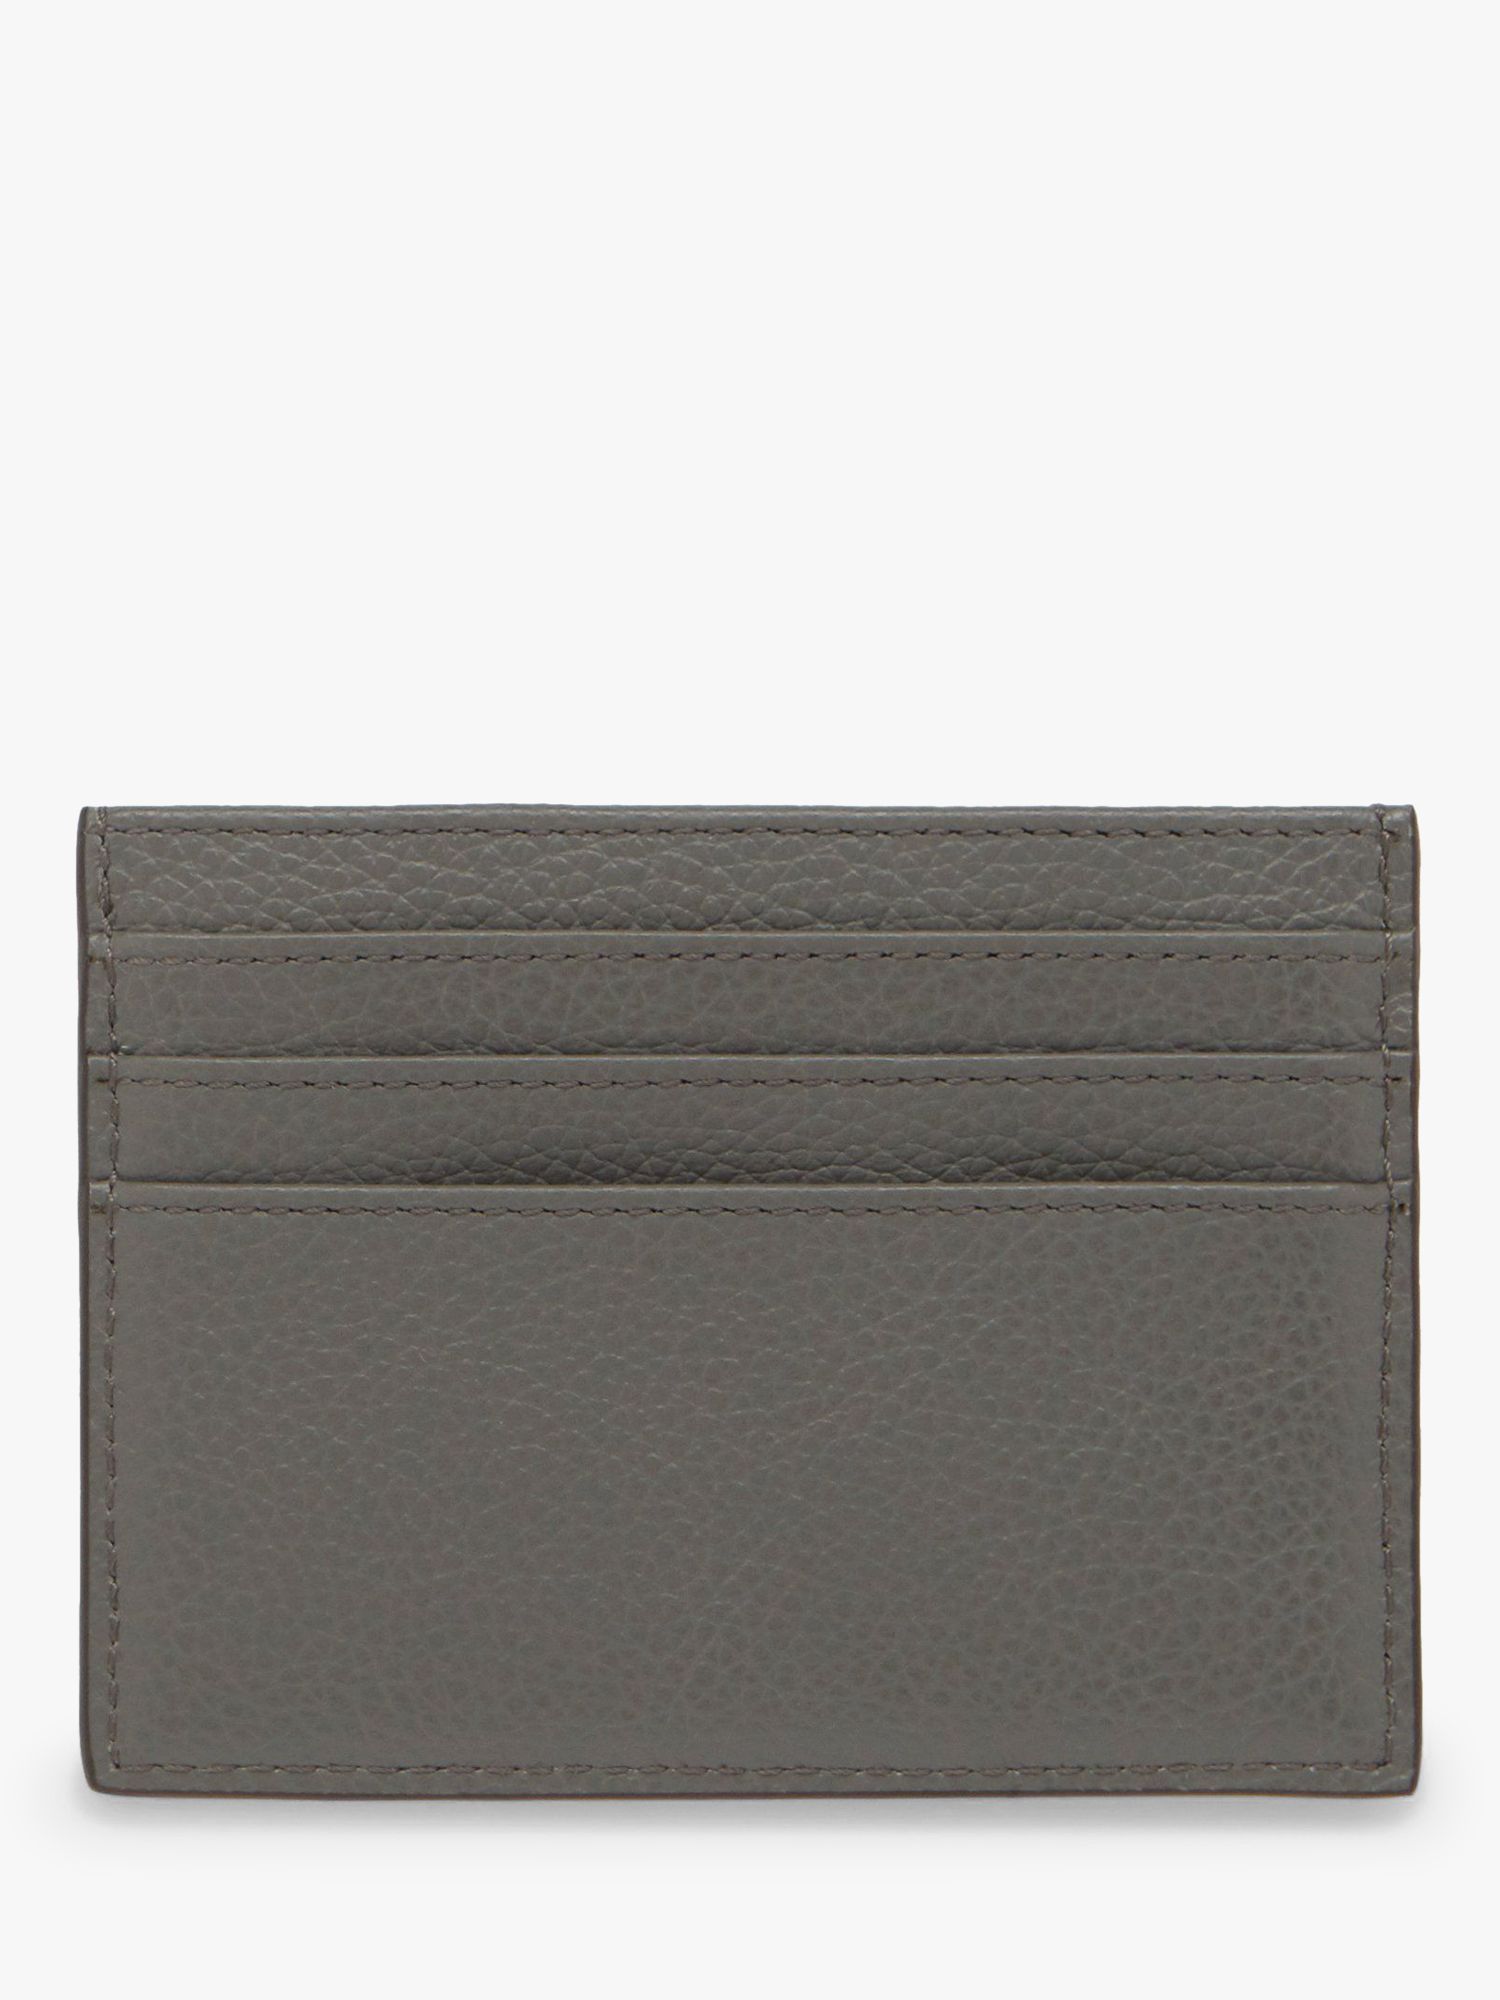 Mulberry Zipped Credit Card Holder - Black Size